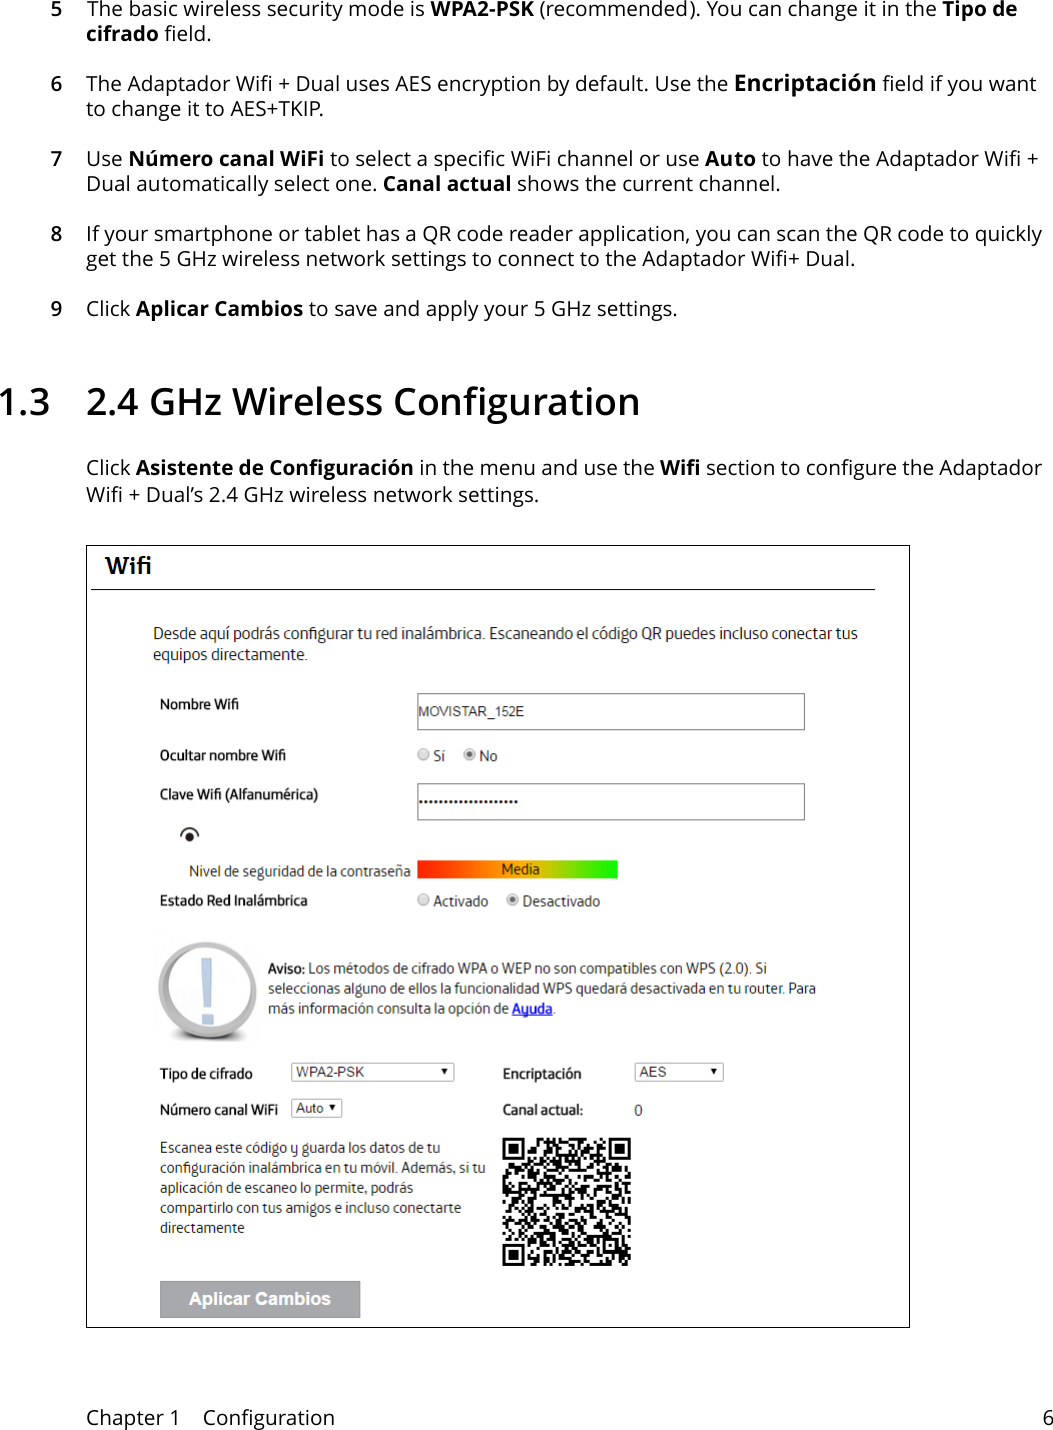 Chapter 1    Configuration 65 The basic wireless security mode is WPA2-PSK (recommended). You can change it in the Tipo de cifrado field. 6The Adaptador Wifi + Dual uses AES encryption by default. Use the Encriptación field if you want to change it to AES+TKIP.7Use Número canal WiFi to select a specific WiFi channel or use Auto to have the Adaptador Wifi + Dual automatically select one. Canal actual shows the current channel.8If your smartphone or tablet has a QR code reader application, you can scan the QR code to quickly get the 5 GHz wireless network settings to connect to the Adaptador Wifi+ Dual.9Click Aplicar Cambios to save and apply your 5 GHz settings.1.3  2.4 GHz Wireless ConfigurationClick Asistente de Configuración in the menu and use the Wifi section to configure the Adaptador Wifi + Dual’s 2.4 GHz wireless network settings.